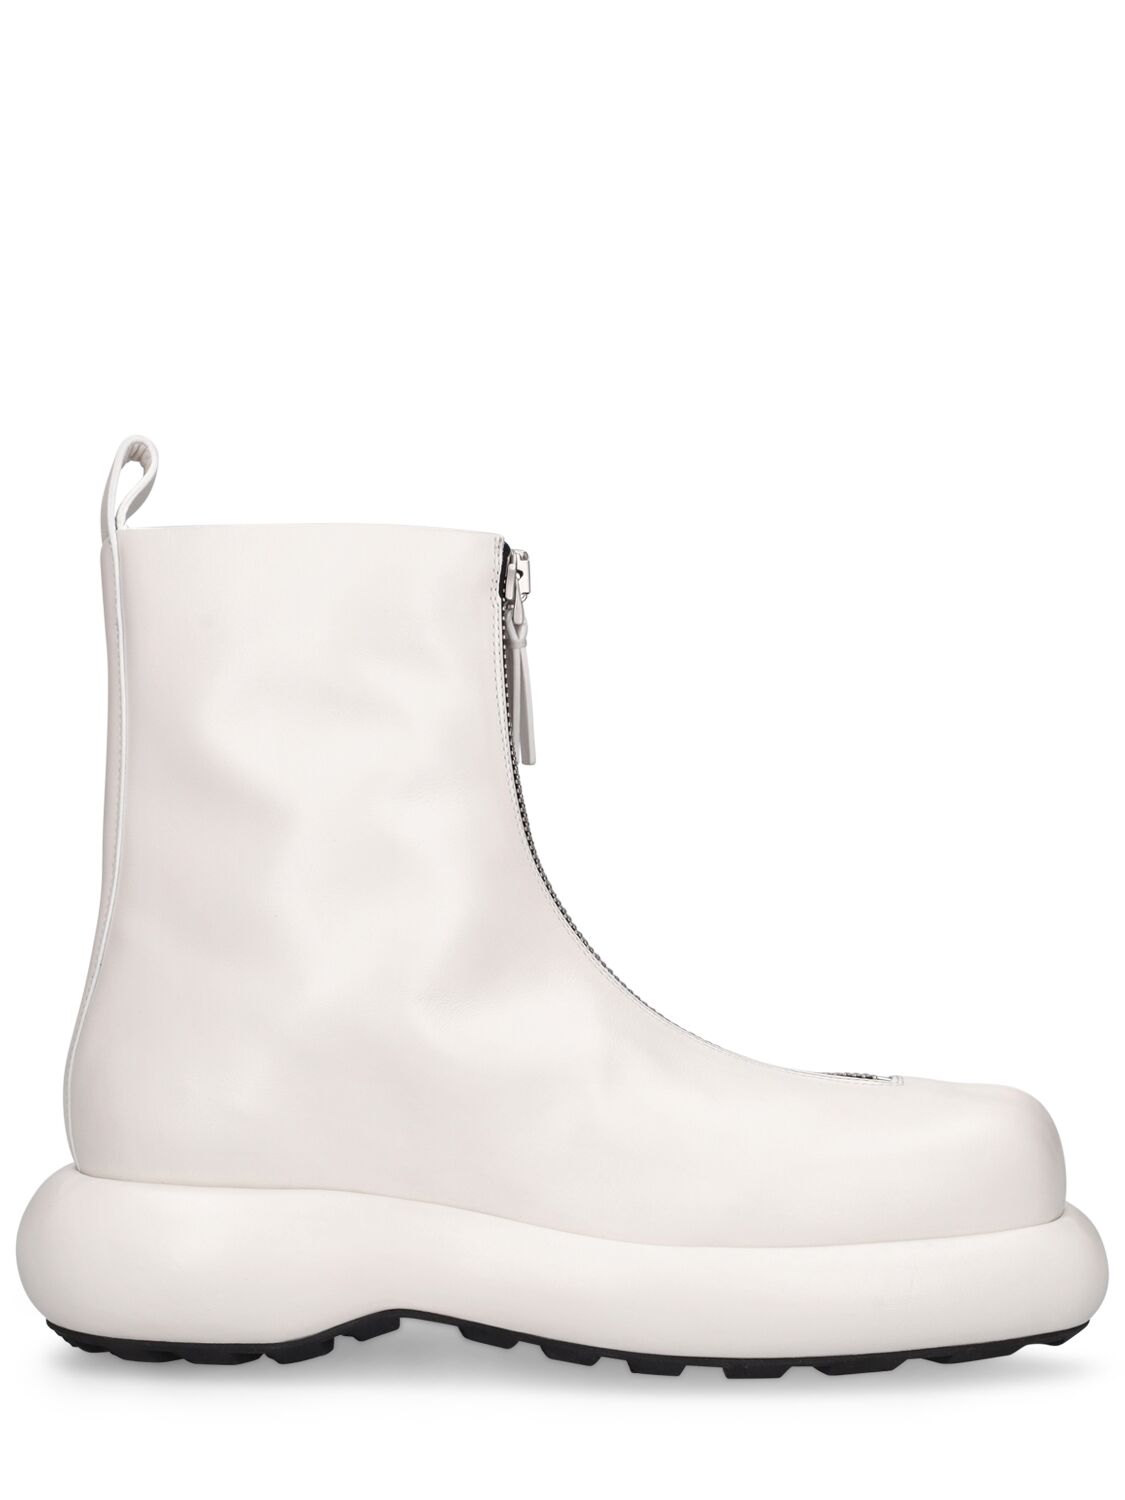 Jil Sander Front-zip Leather Ankle Boots In White | ModeSens